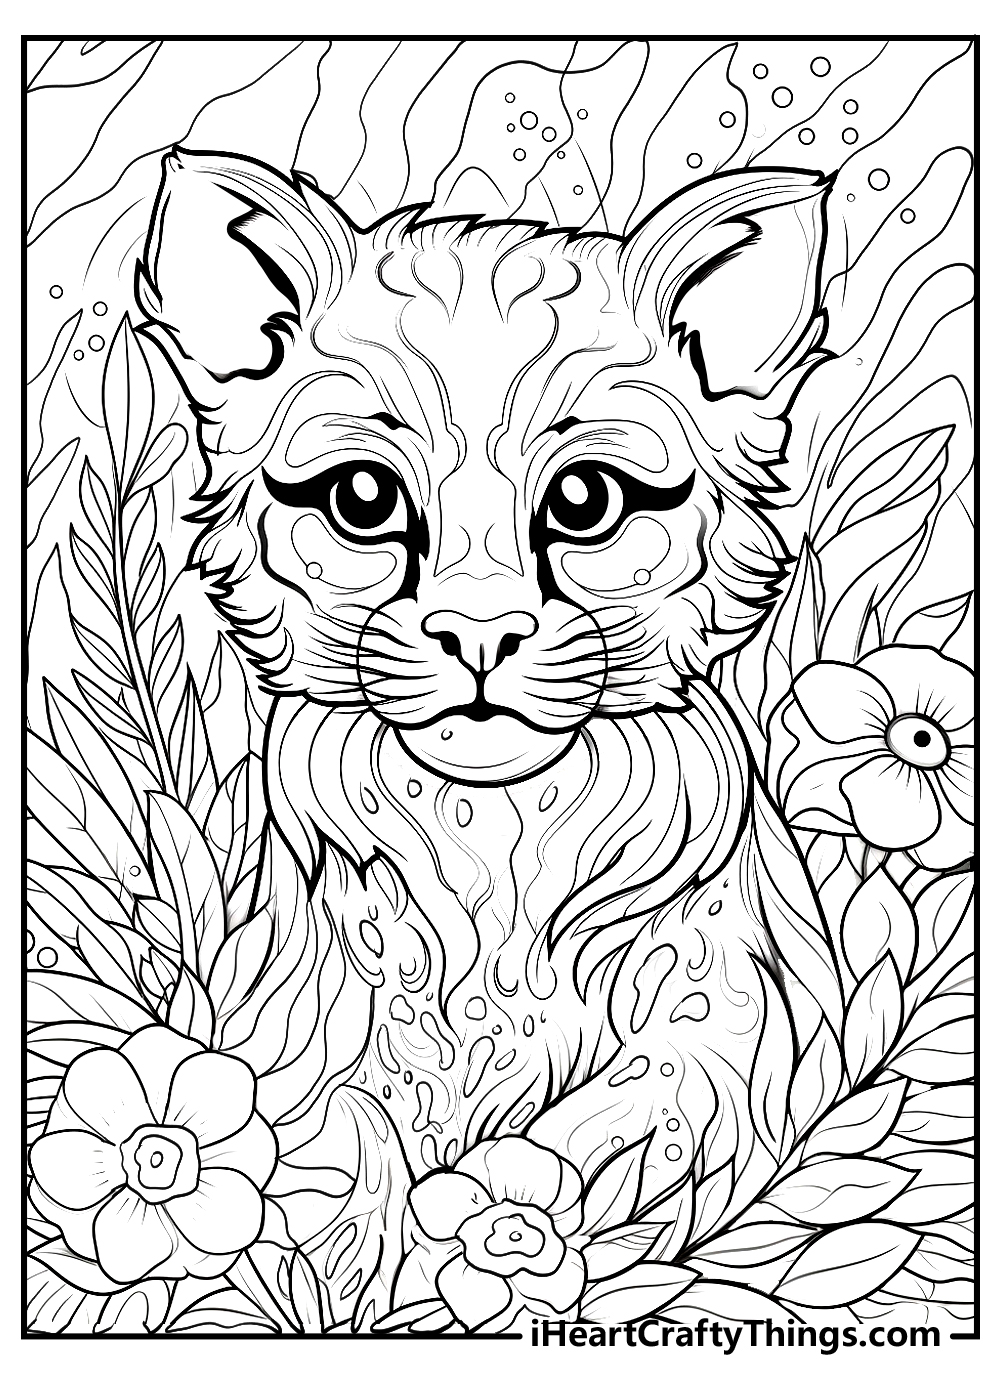 Printable lisa frank coloring pages updated